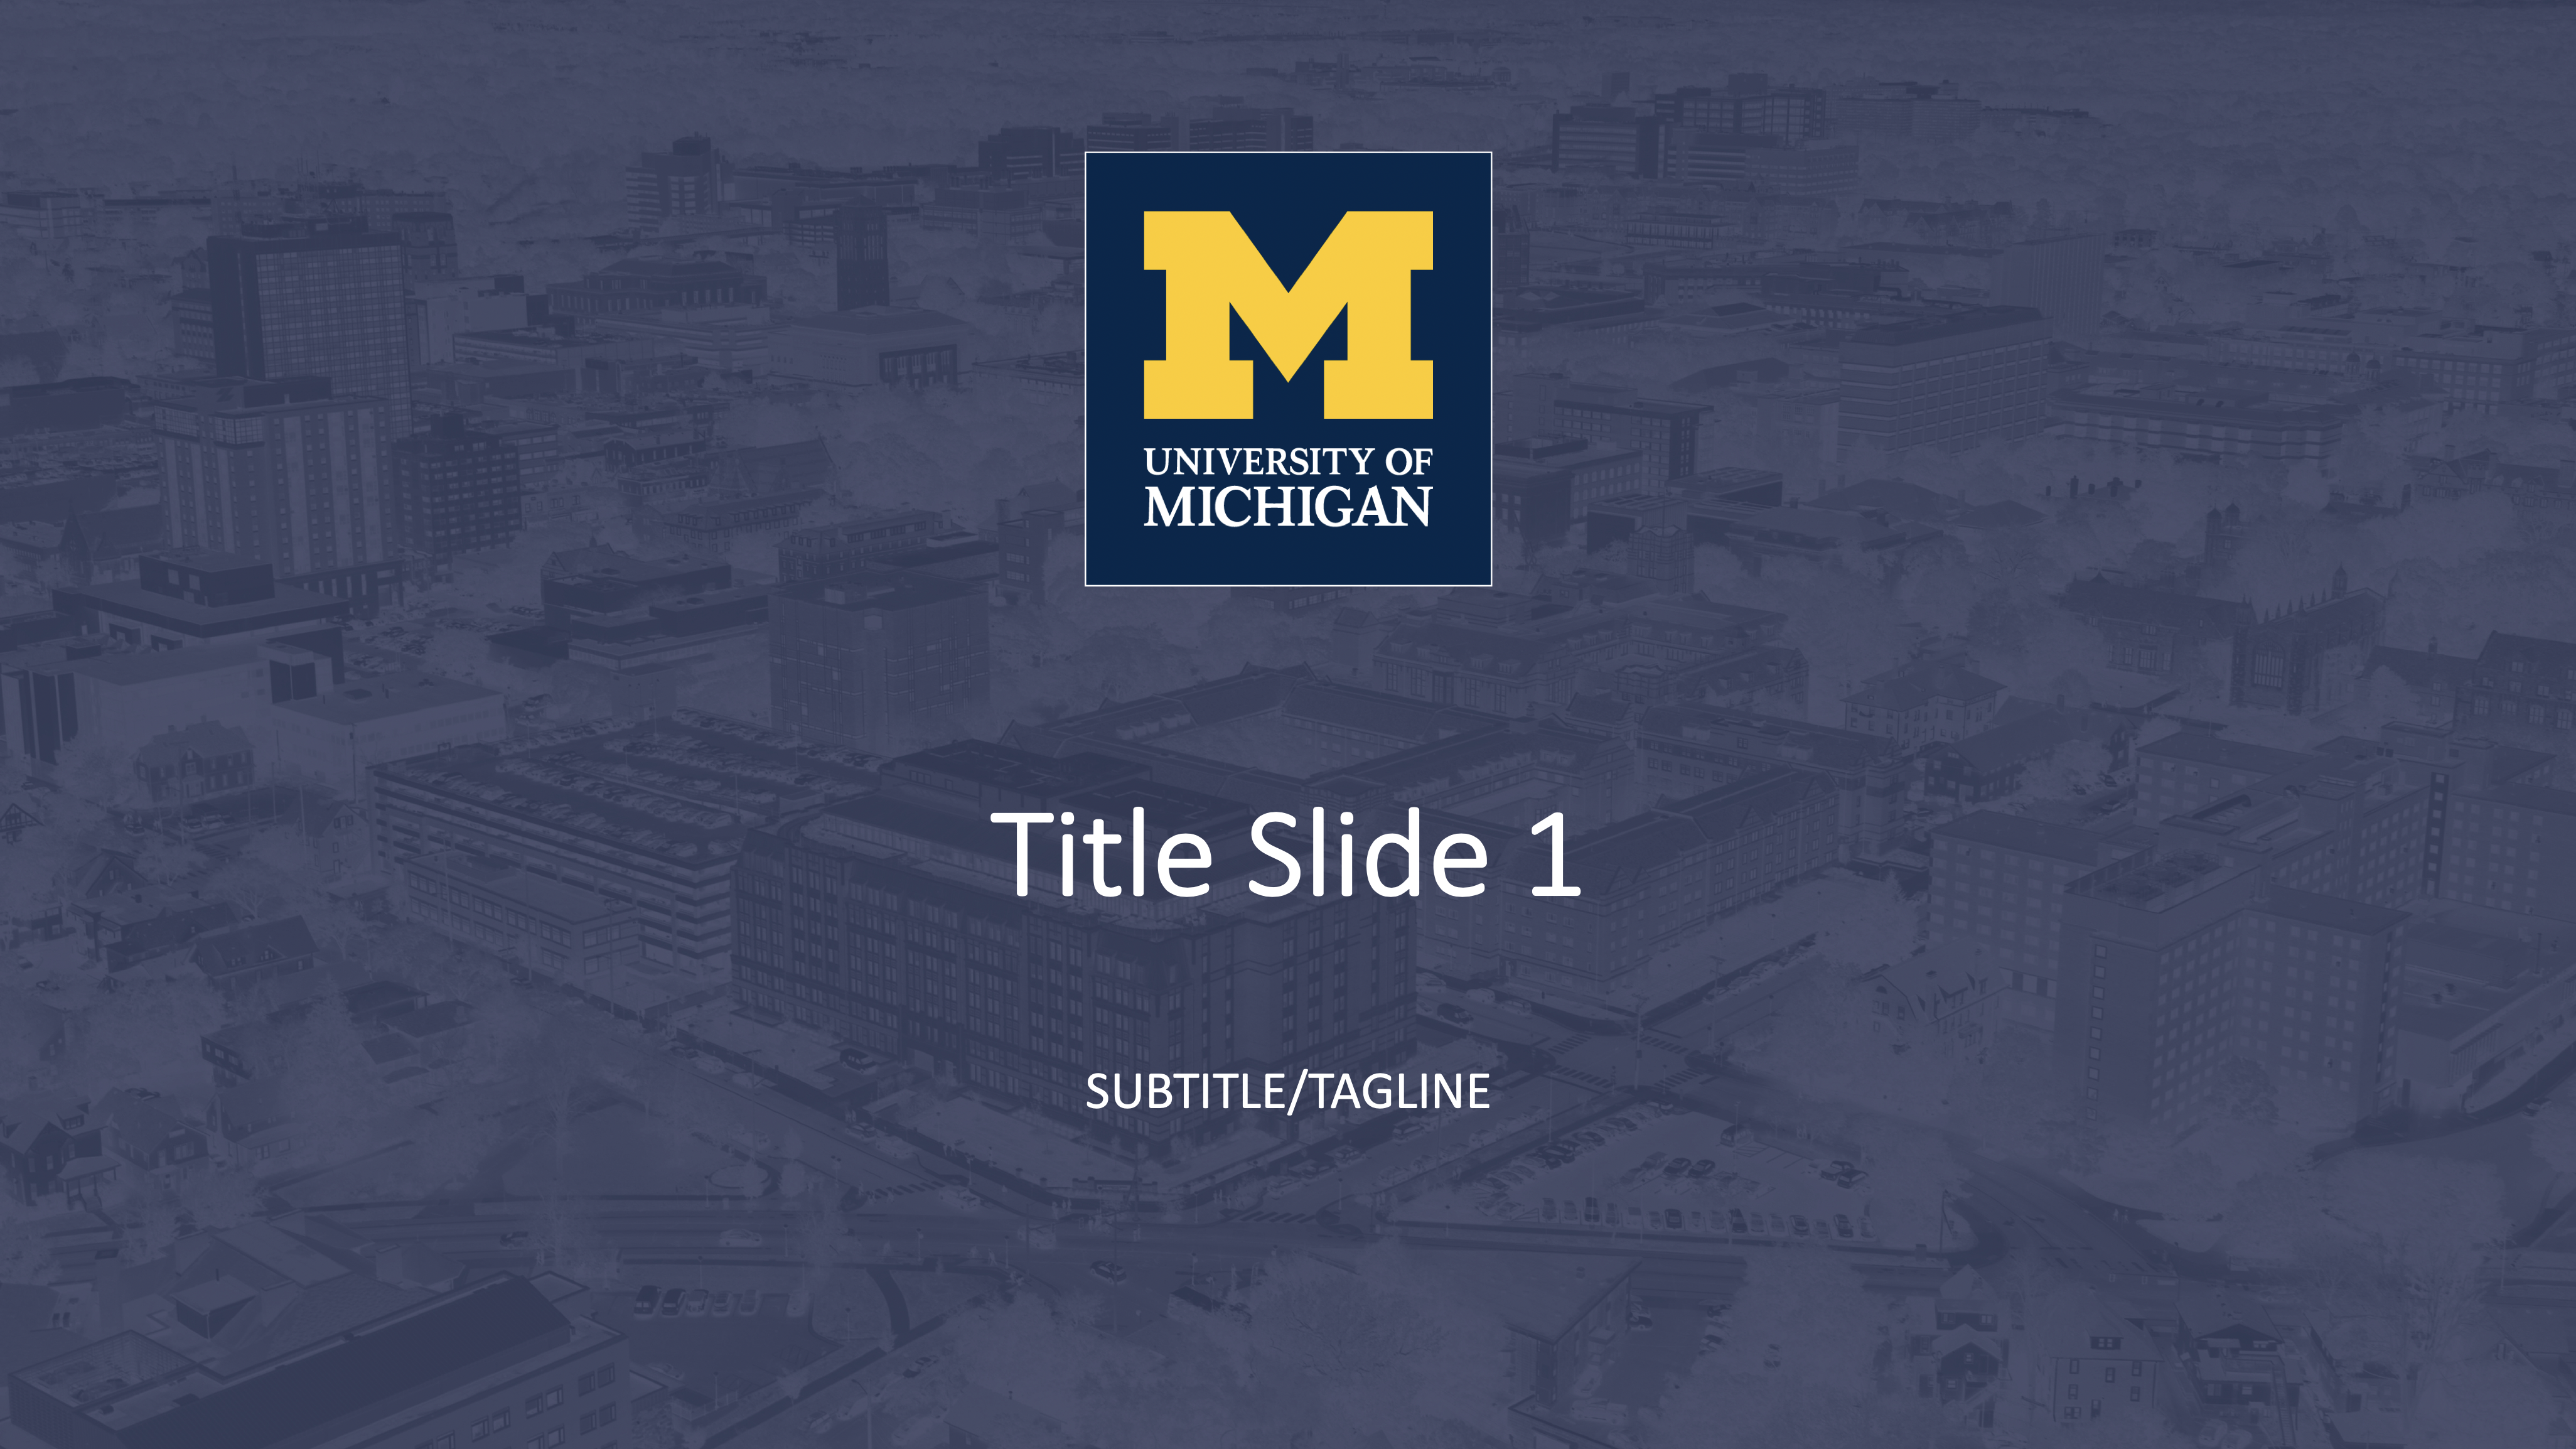 Block M title slide with campus photo background with color overlay